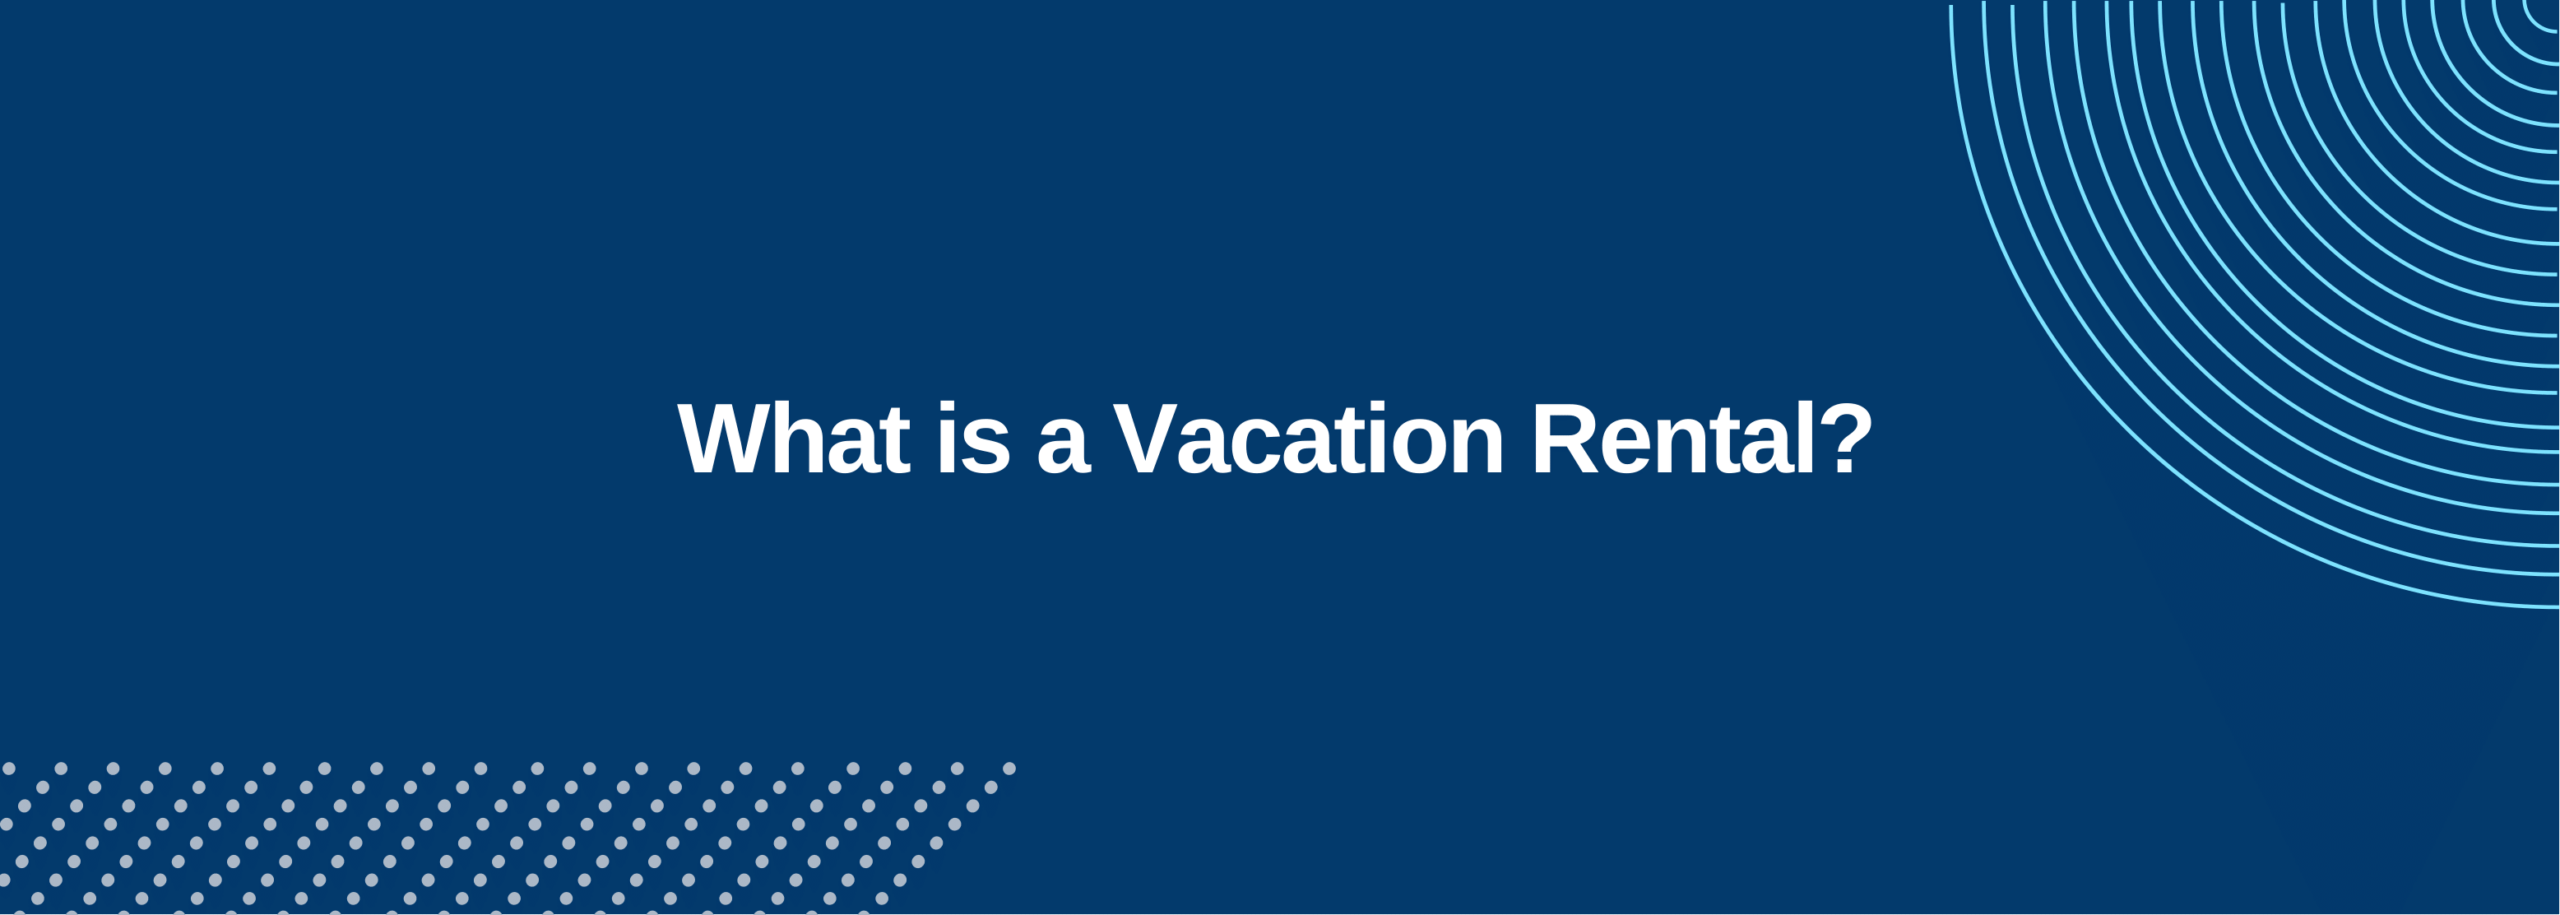 A vacation rental is an investment property rented out for short periods of time, typically less than one month.